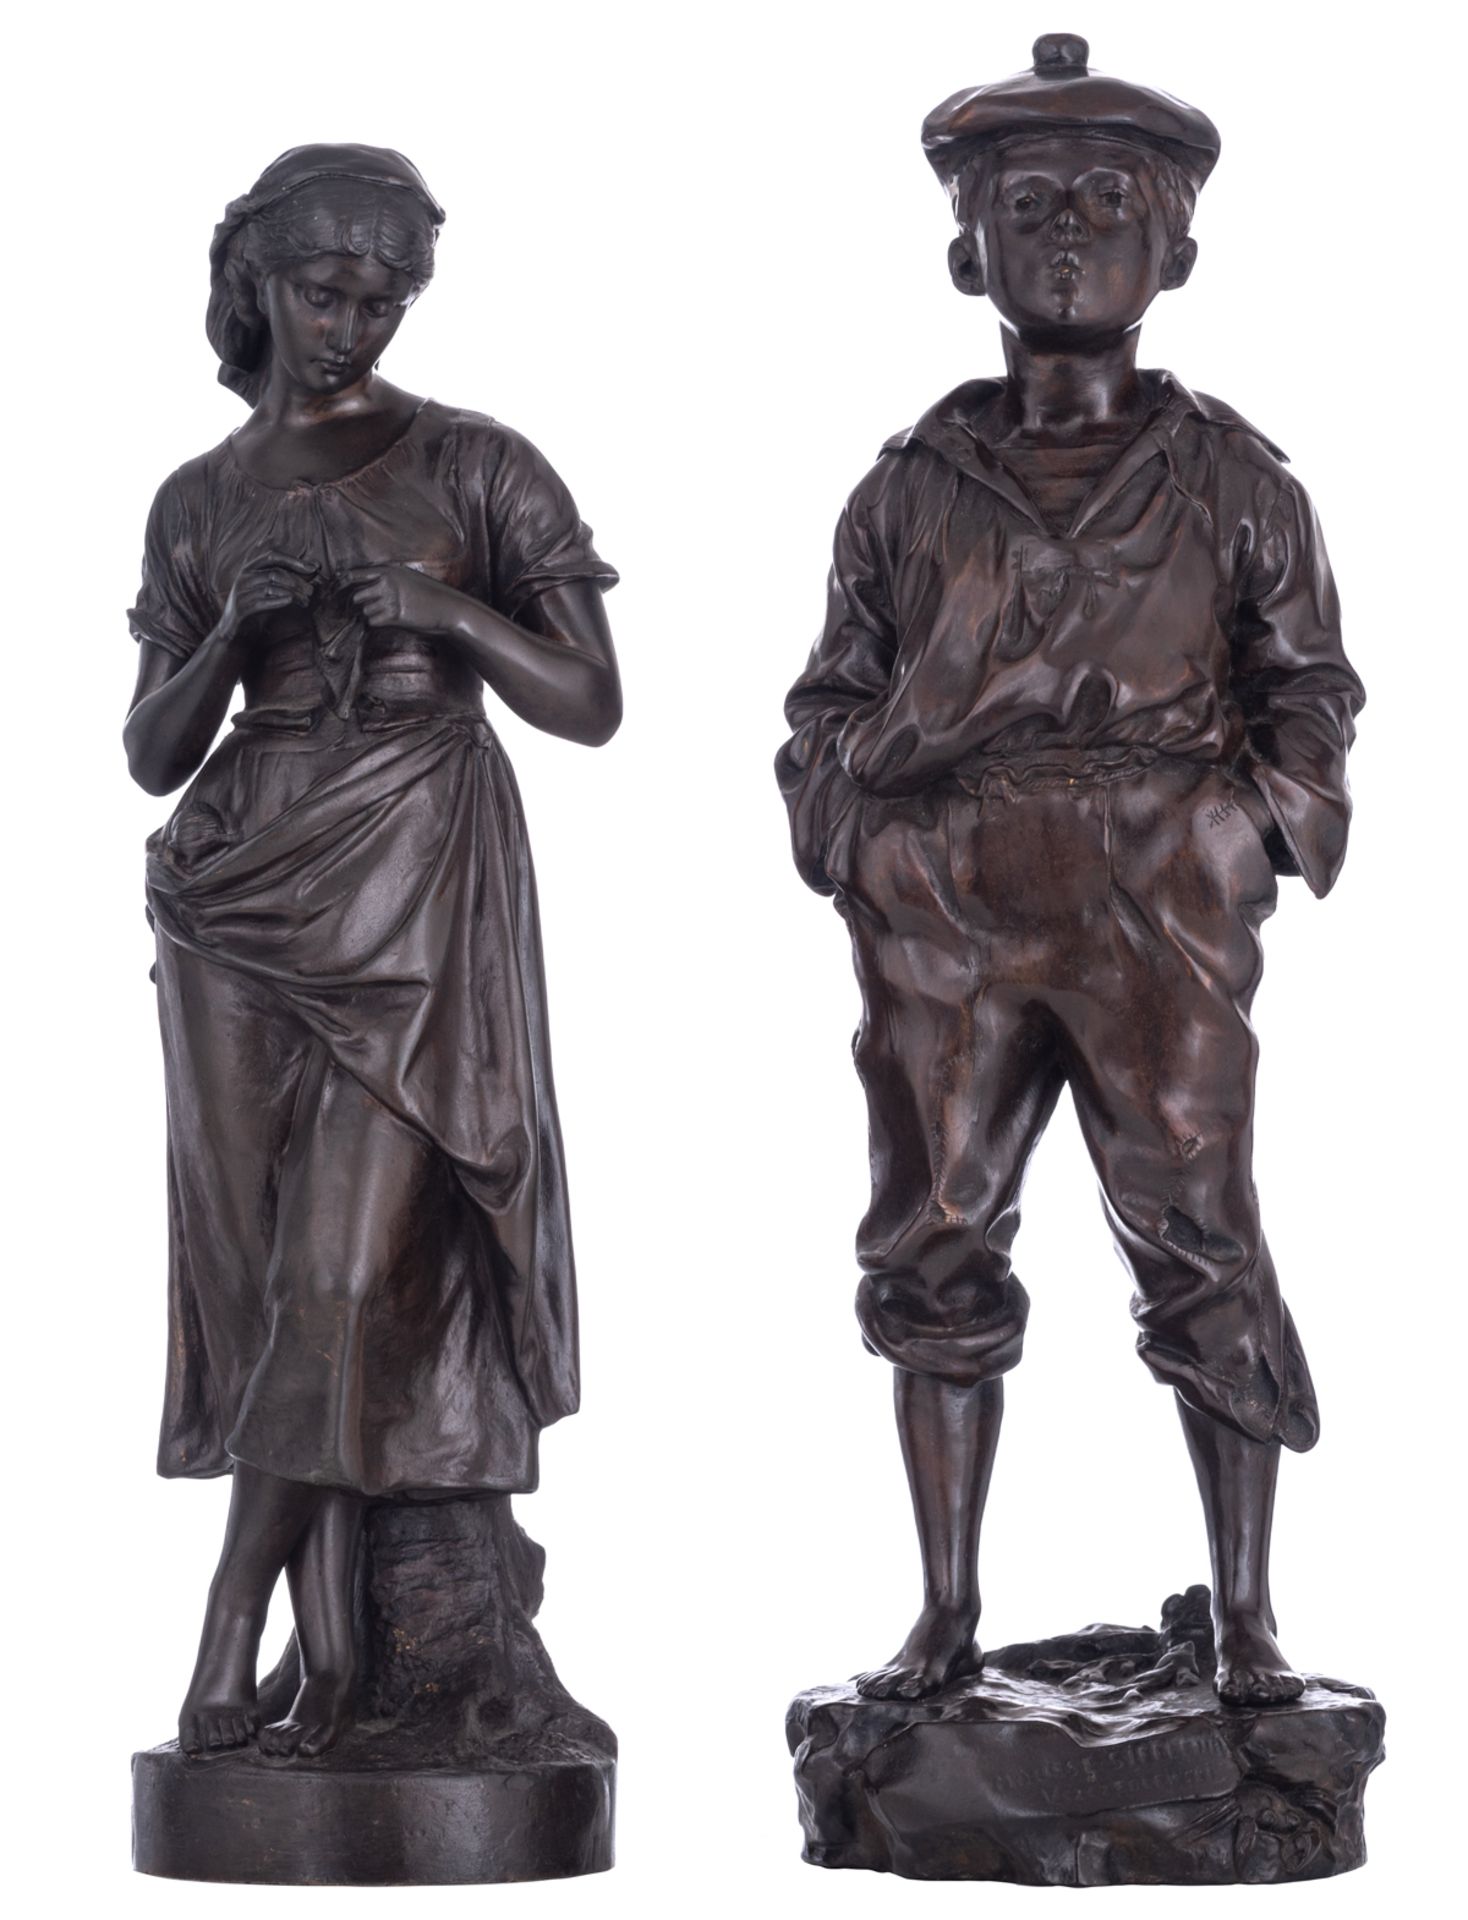 Szczeblewski V., 'Mousse Siffleur', patinated bronze, H 54 cm; added: Laurent, a young beauty sewing